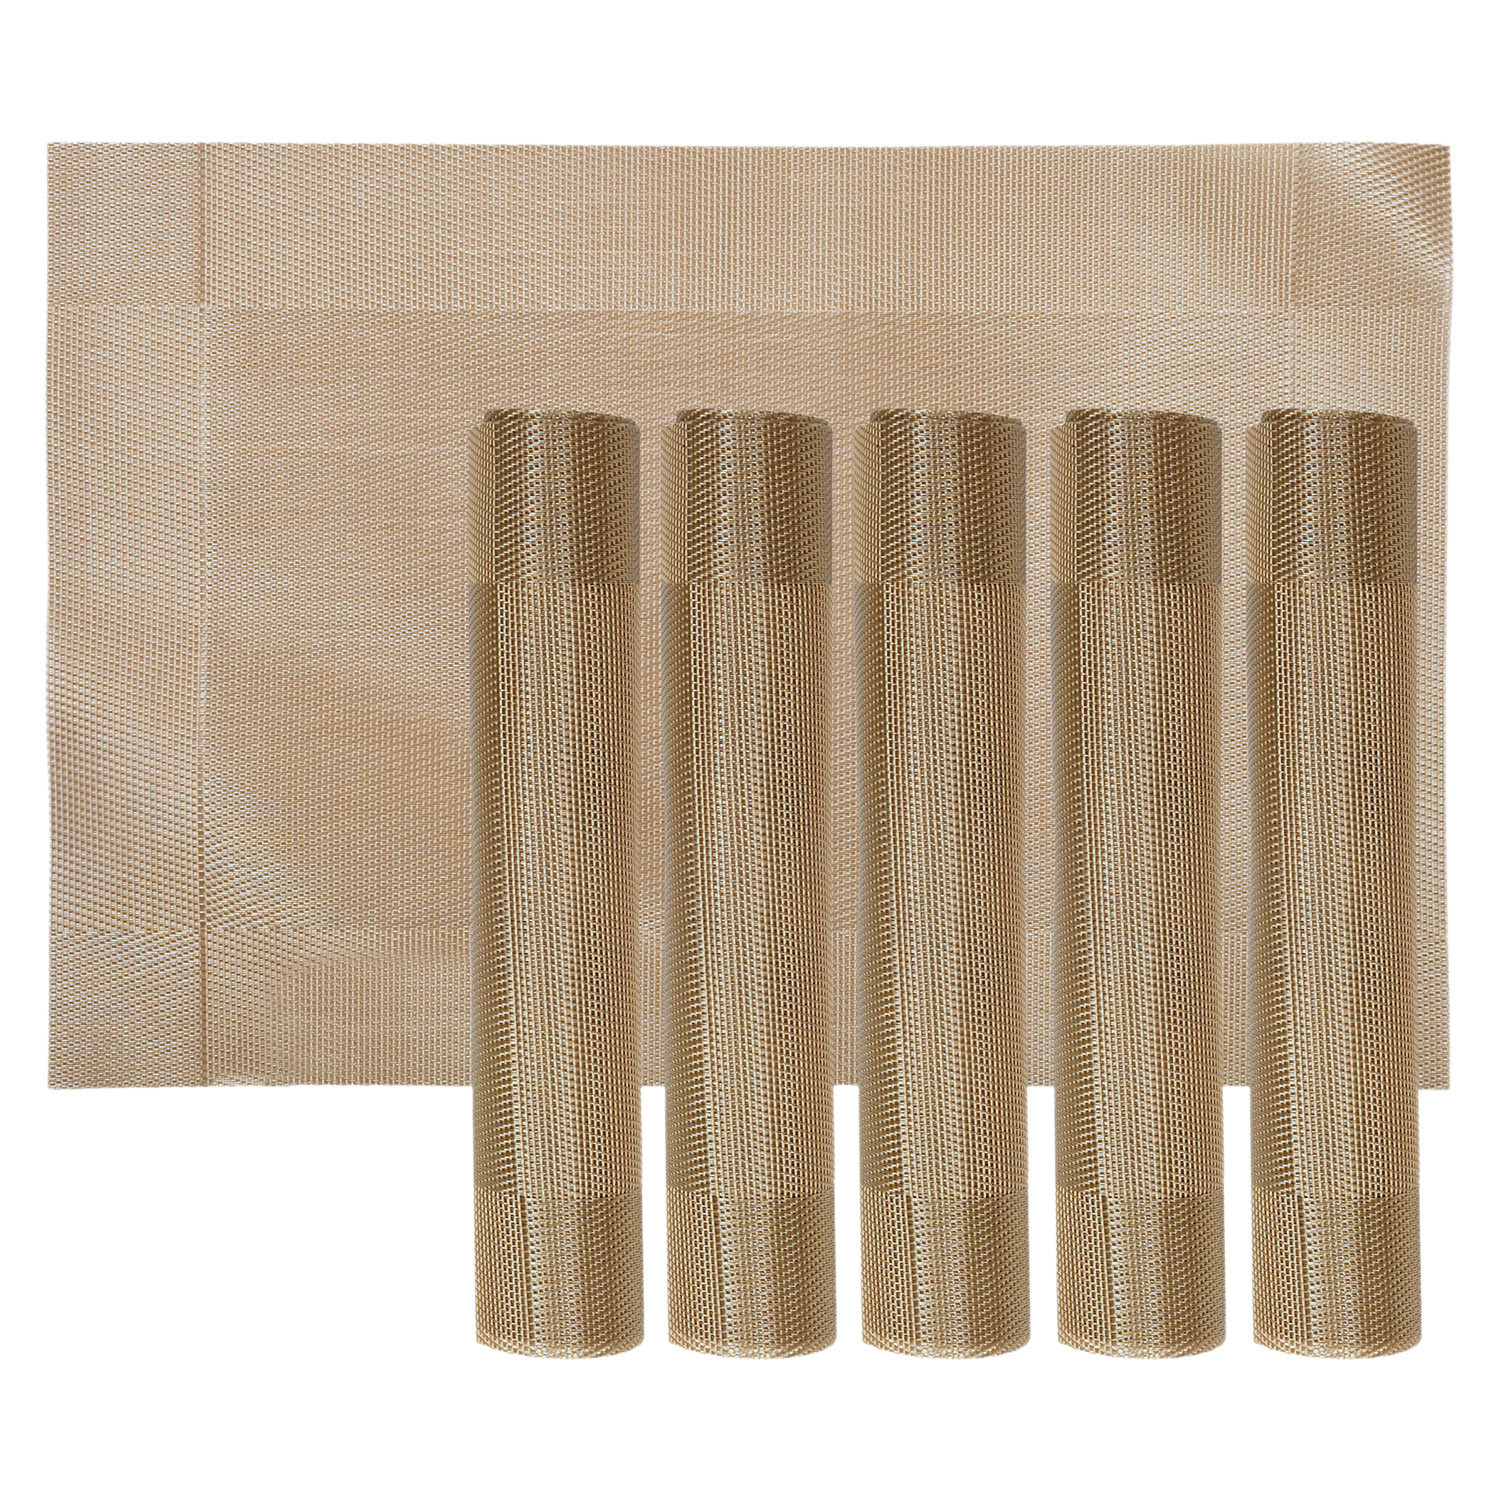 Kuber Industries Reversible Non-Slip Wipe Clean Heat Resistant PVC Placemats for Dining Table,(Copper)